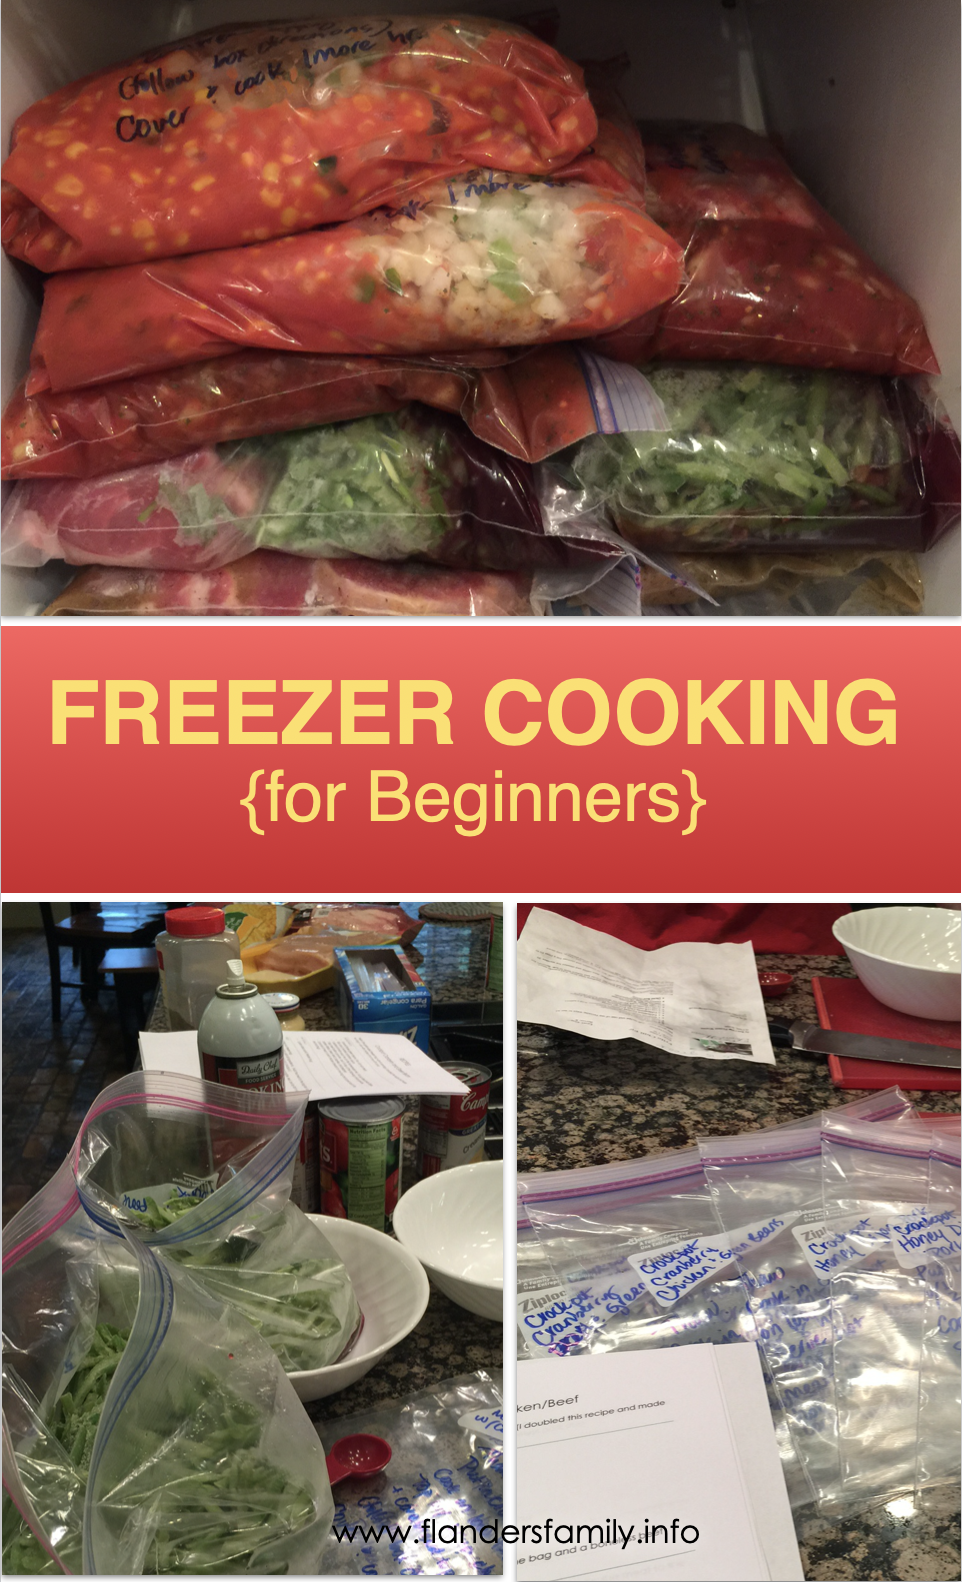 Freezer Cooking for Beginners